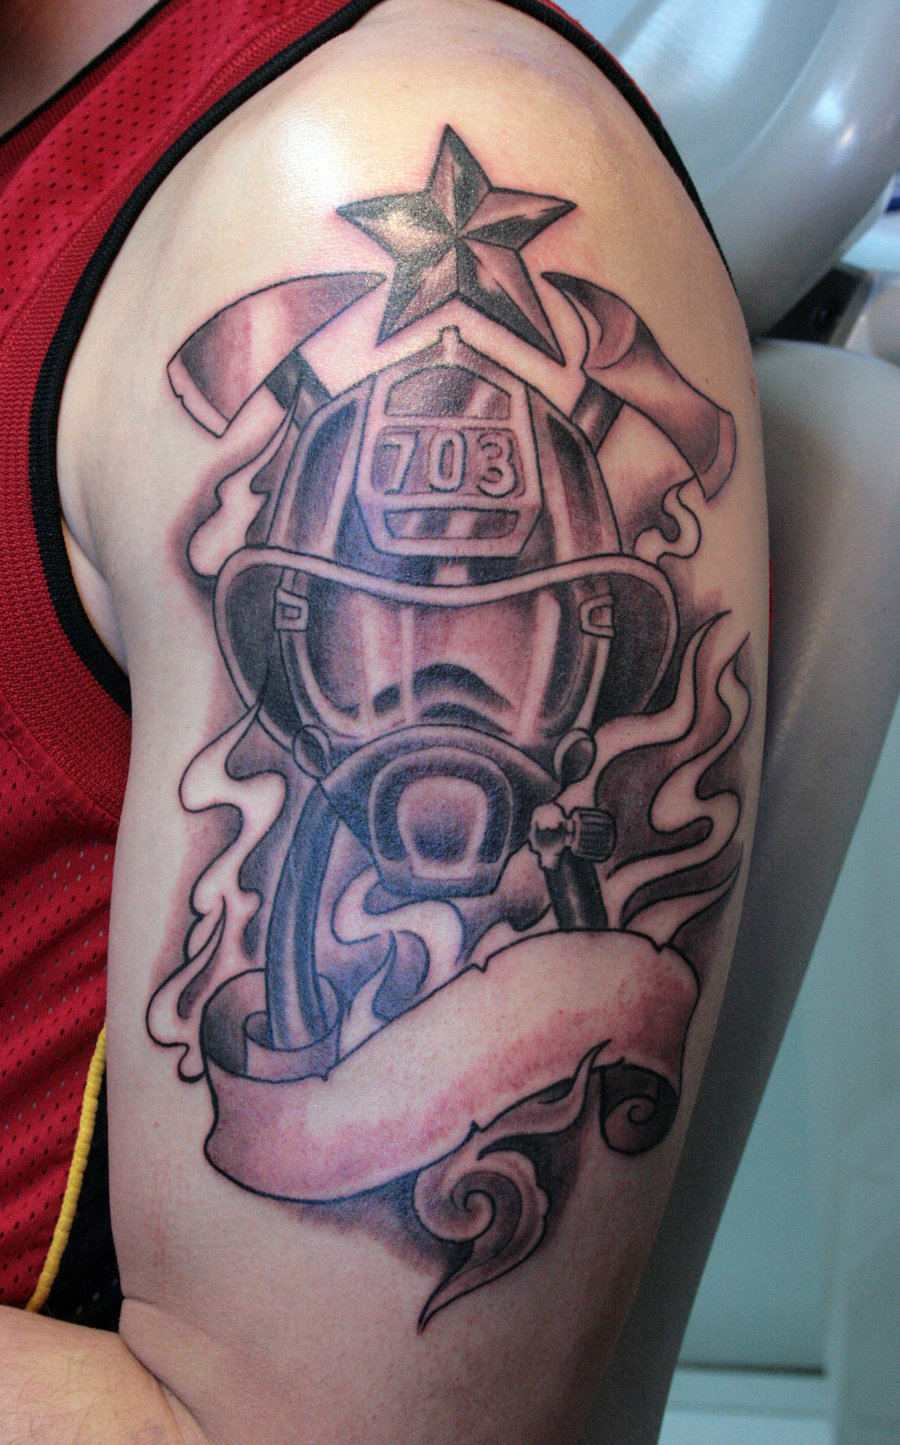 Fireman tattoo for my dad. He loves it and so do I. Done by Aaron Jackman  of Ghost Tattoo in Las Vegas : r/tattoos